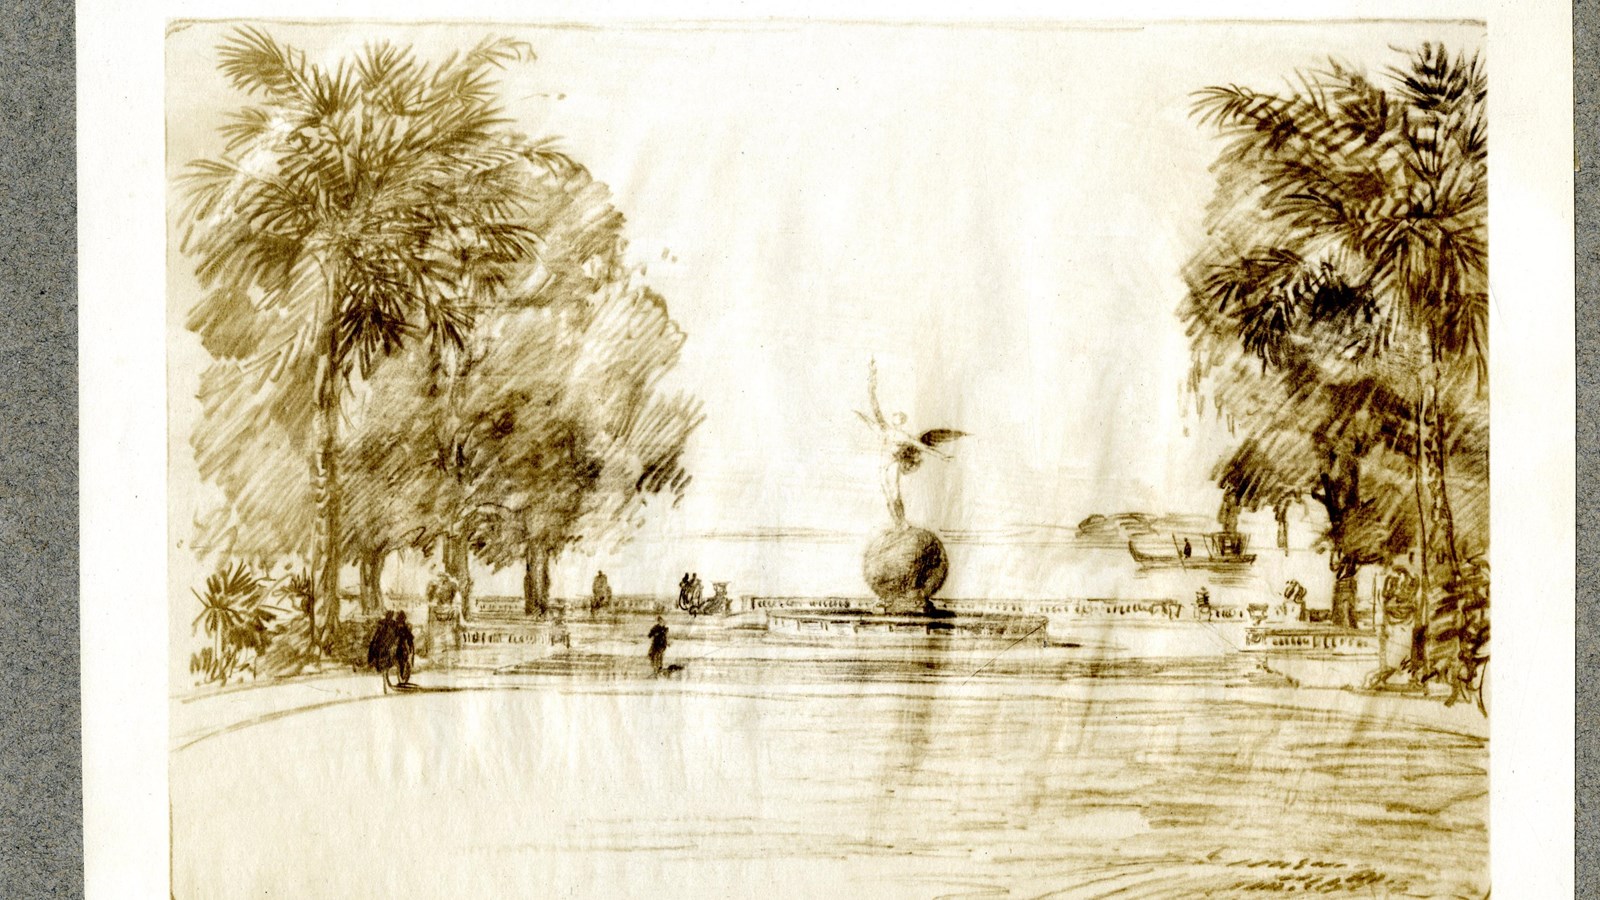 Pencil drawing of statue of circle with person standing on it with trees on both sides 